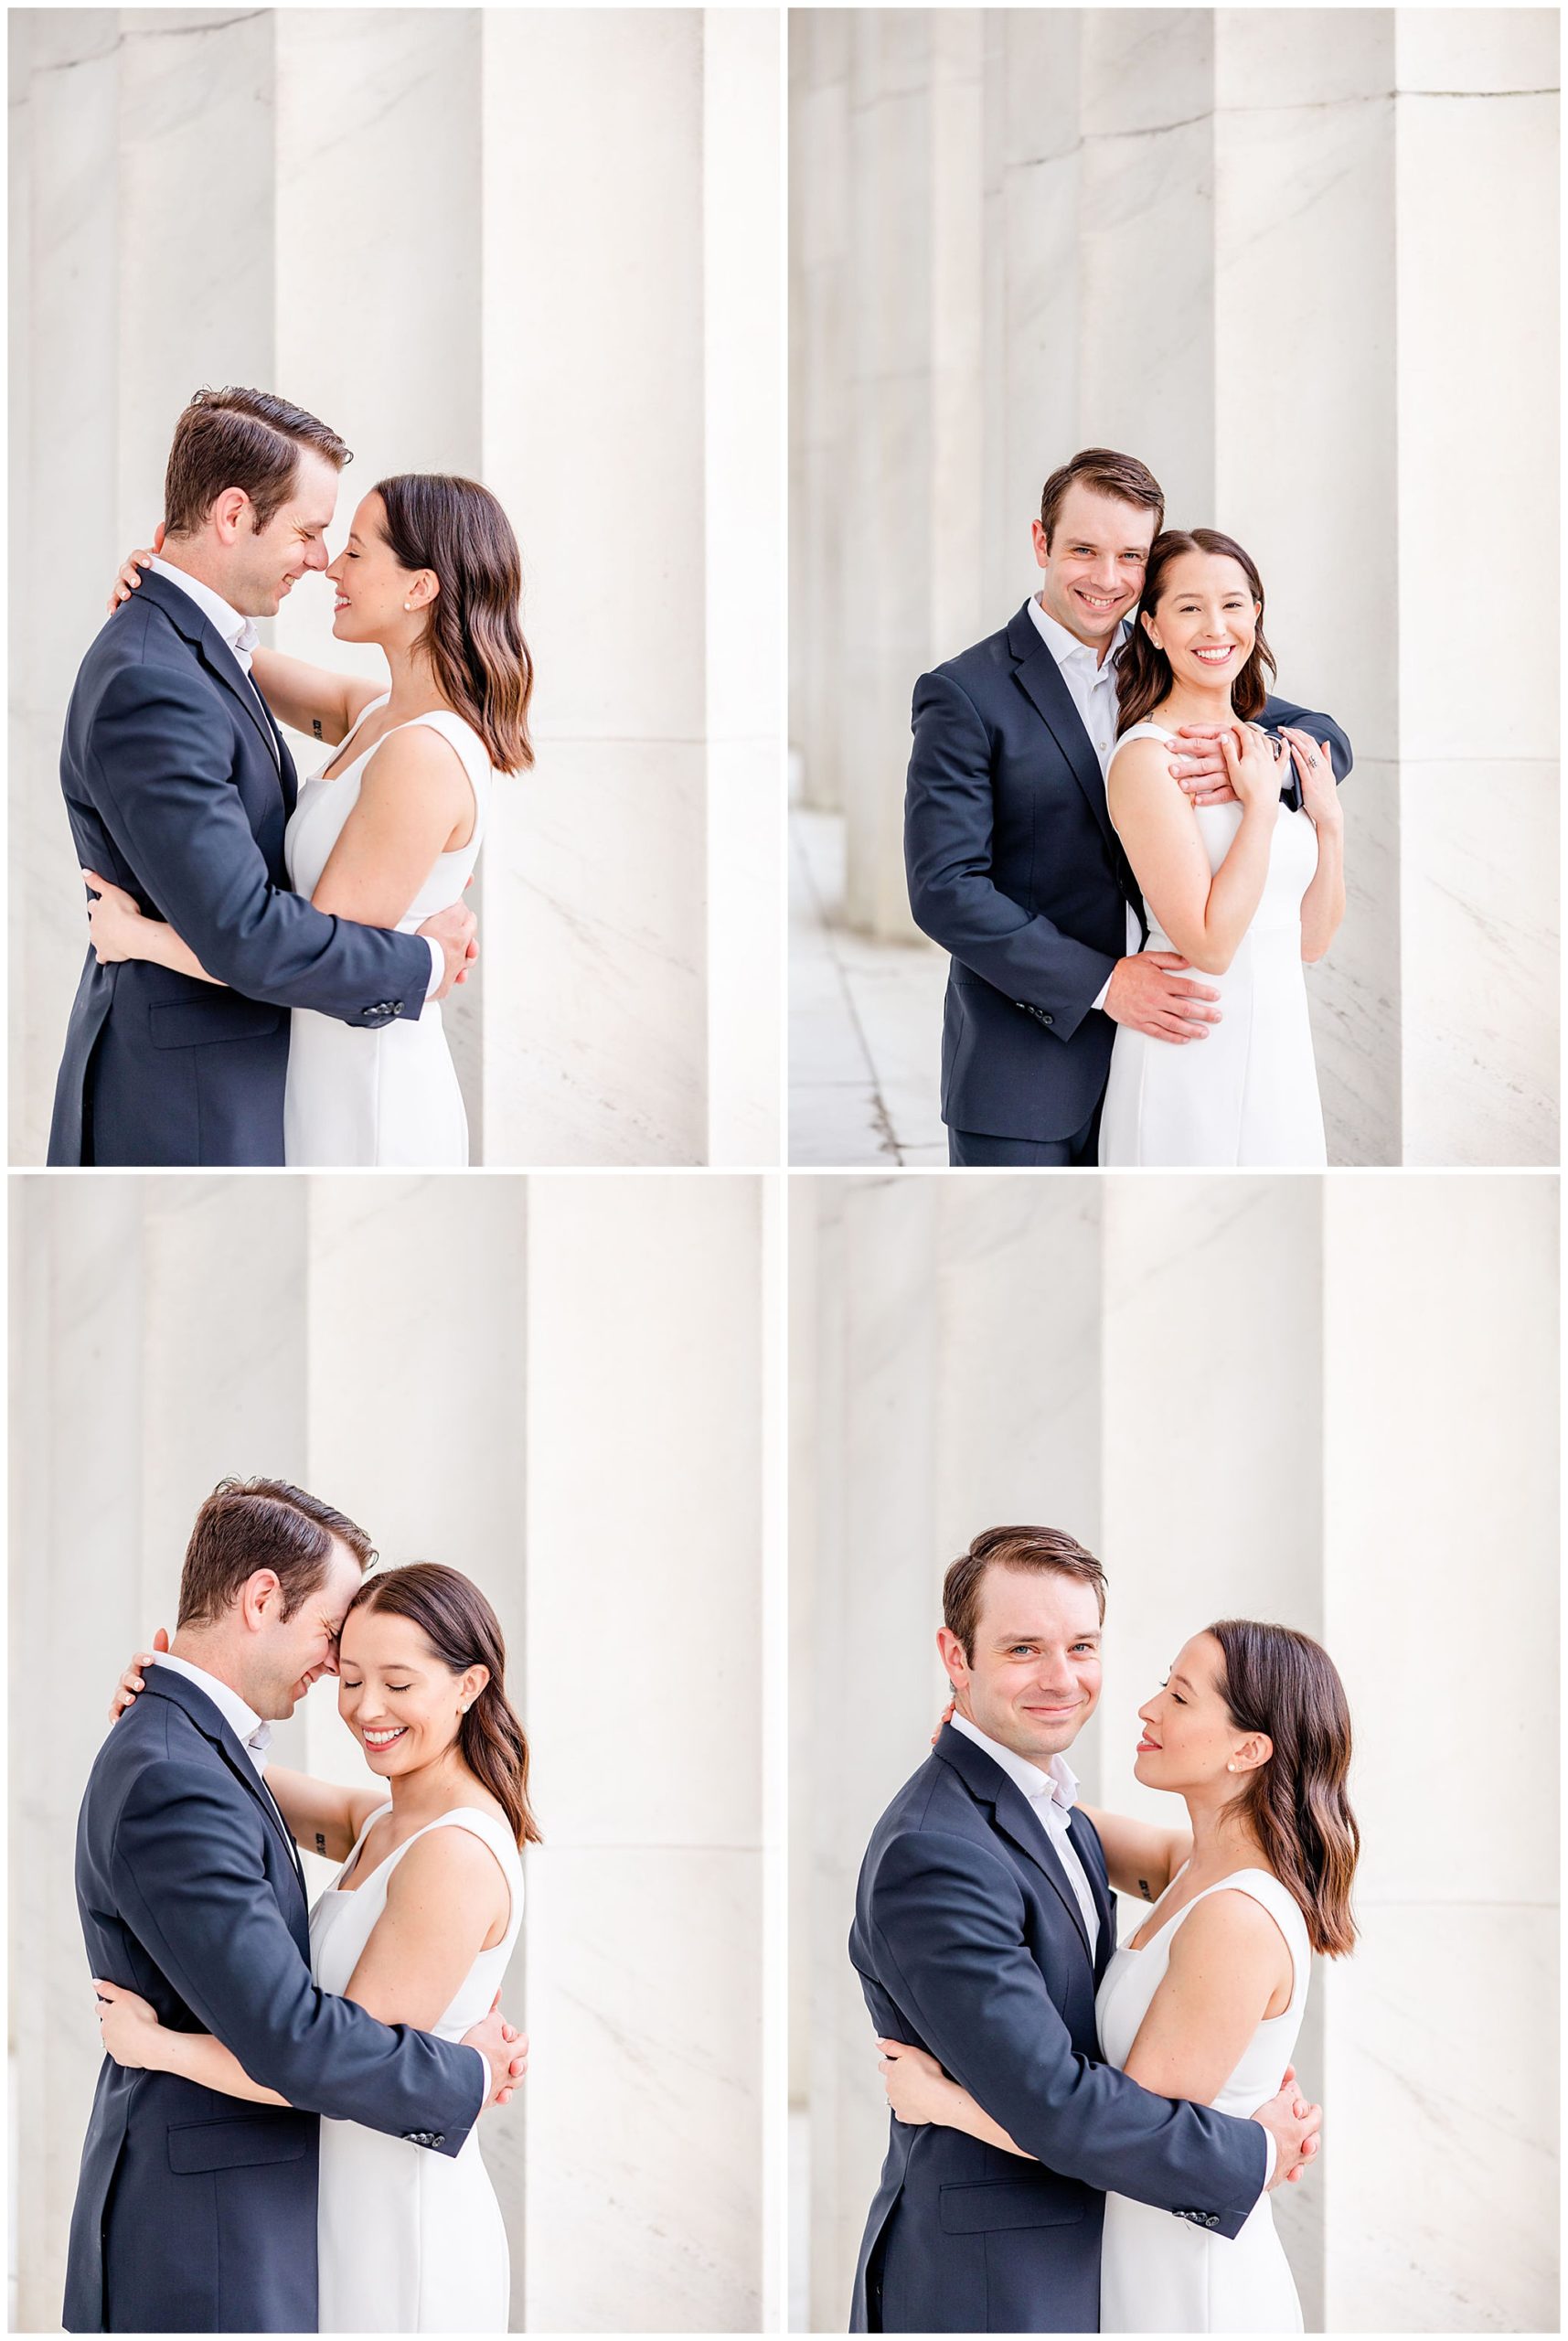 pink sunrise Lincoln Memorial engagement, DC engagement session, DC engagement photographer, formal DC engagement photos, DC elopement photographer, DC wedding photographer, classic DC engagement photos, luxury DC engagement photographer, Rachel E.H. Photography, man hugging woman from behind, couple holding each other 